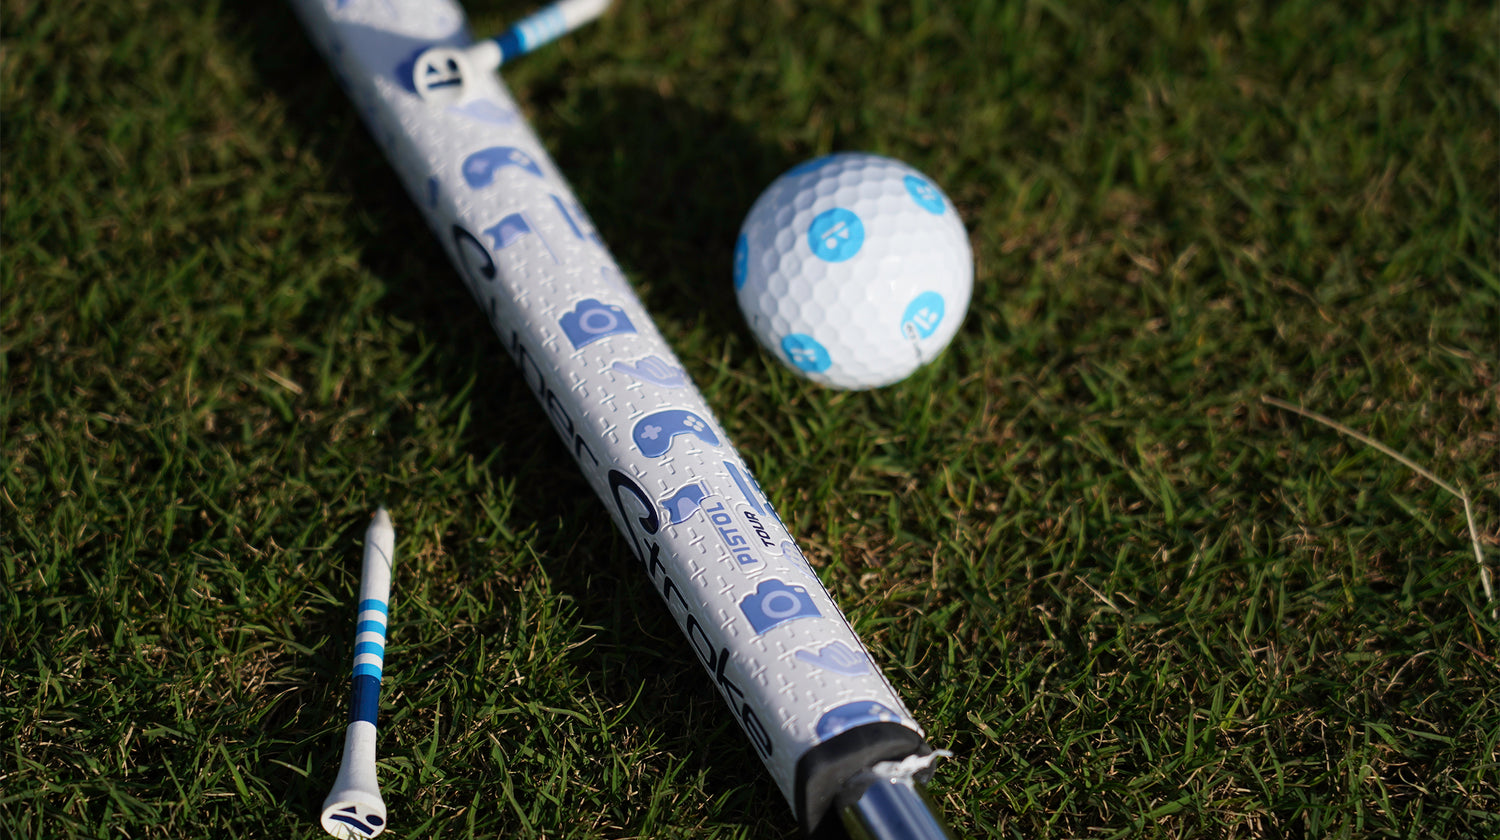 SuperStroke Debuts Limited-Edition The Bryan Bros Putter Grip